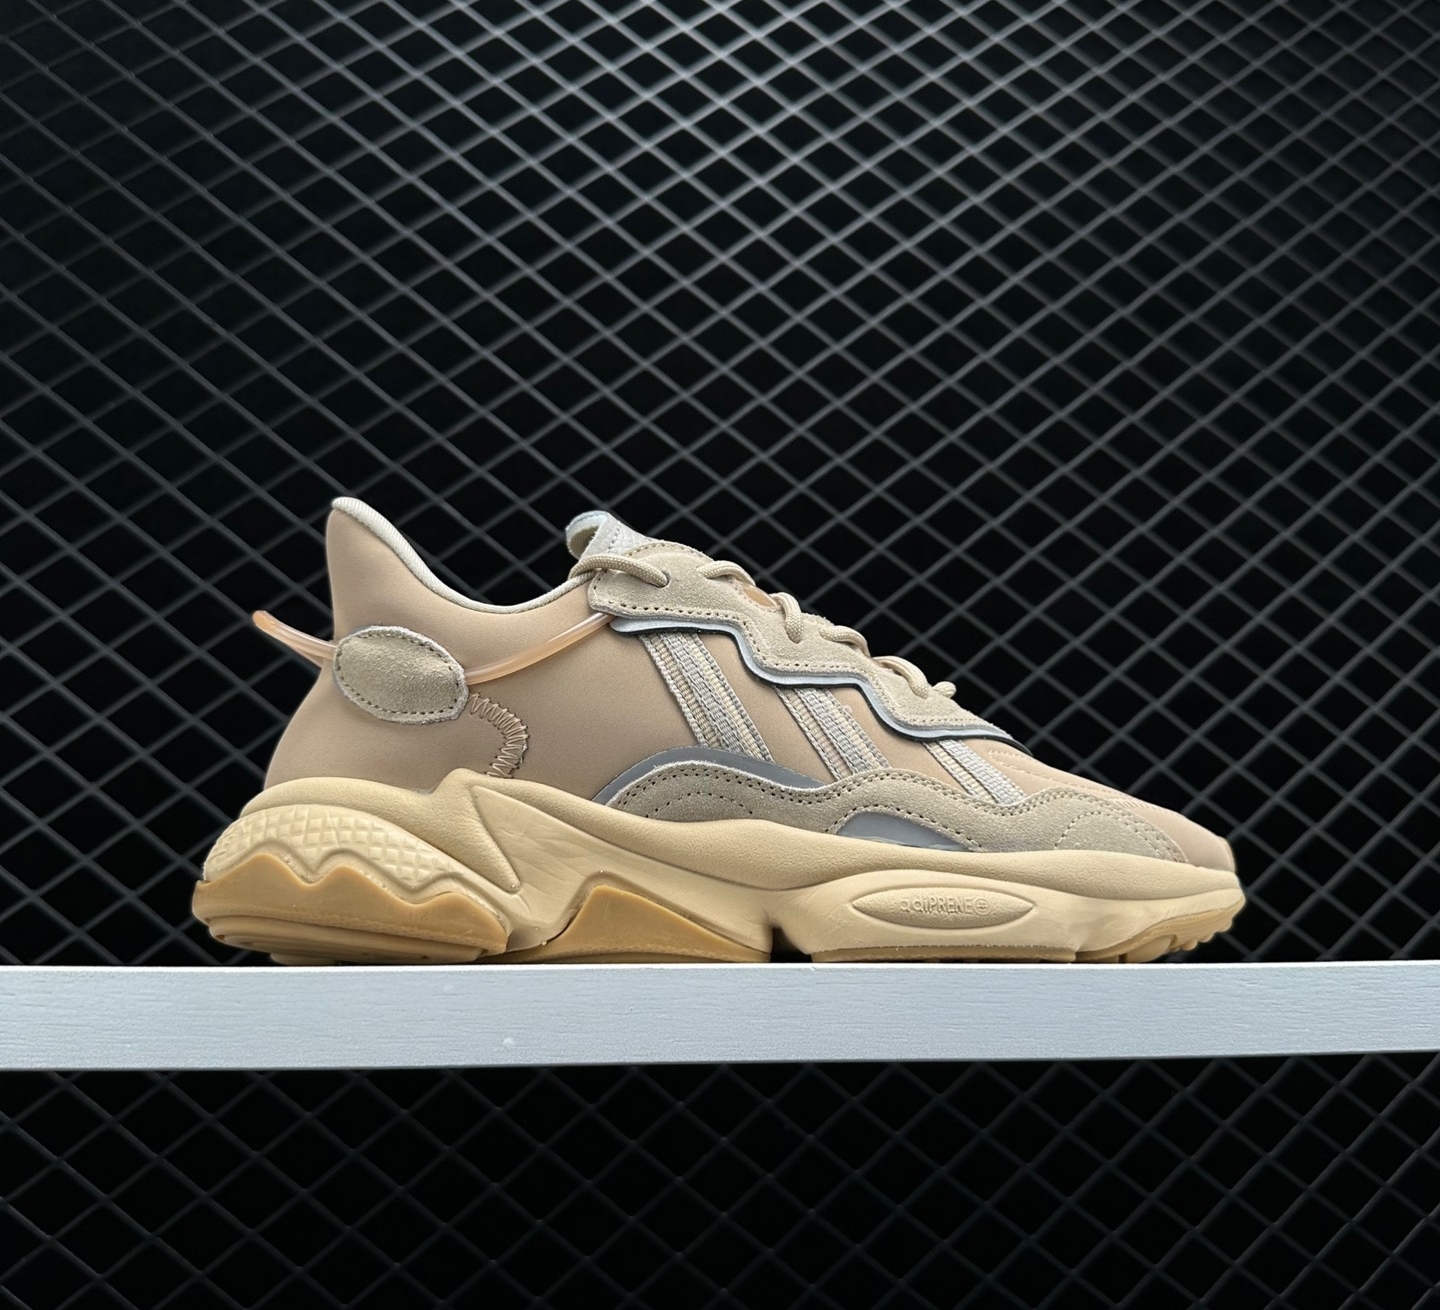 Adidas Ozweego 'Pale Nude' EE6462 - Exquisite Style for Modern Sneaker Lovers